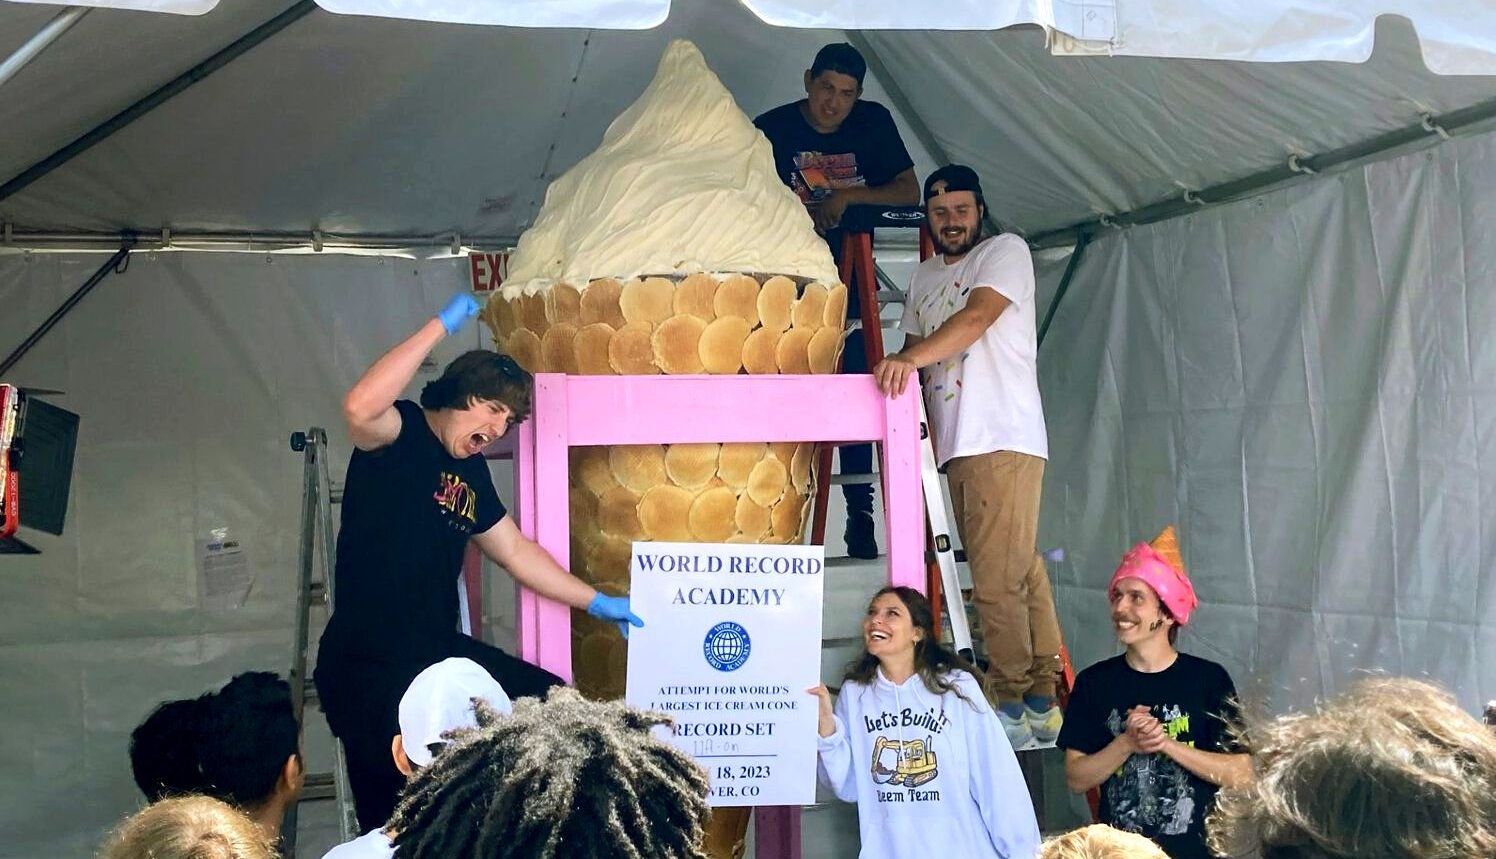 
World's Largest Ice Cream Cone: world record in Englewood, Colorado